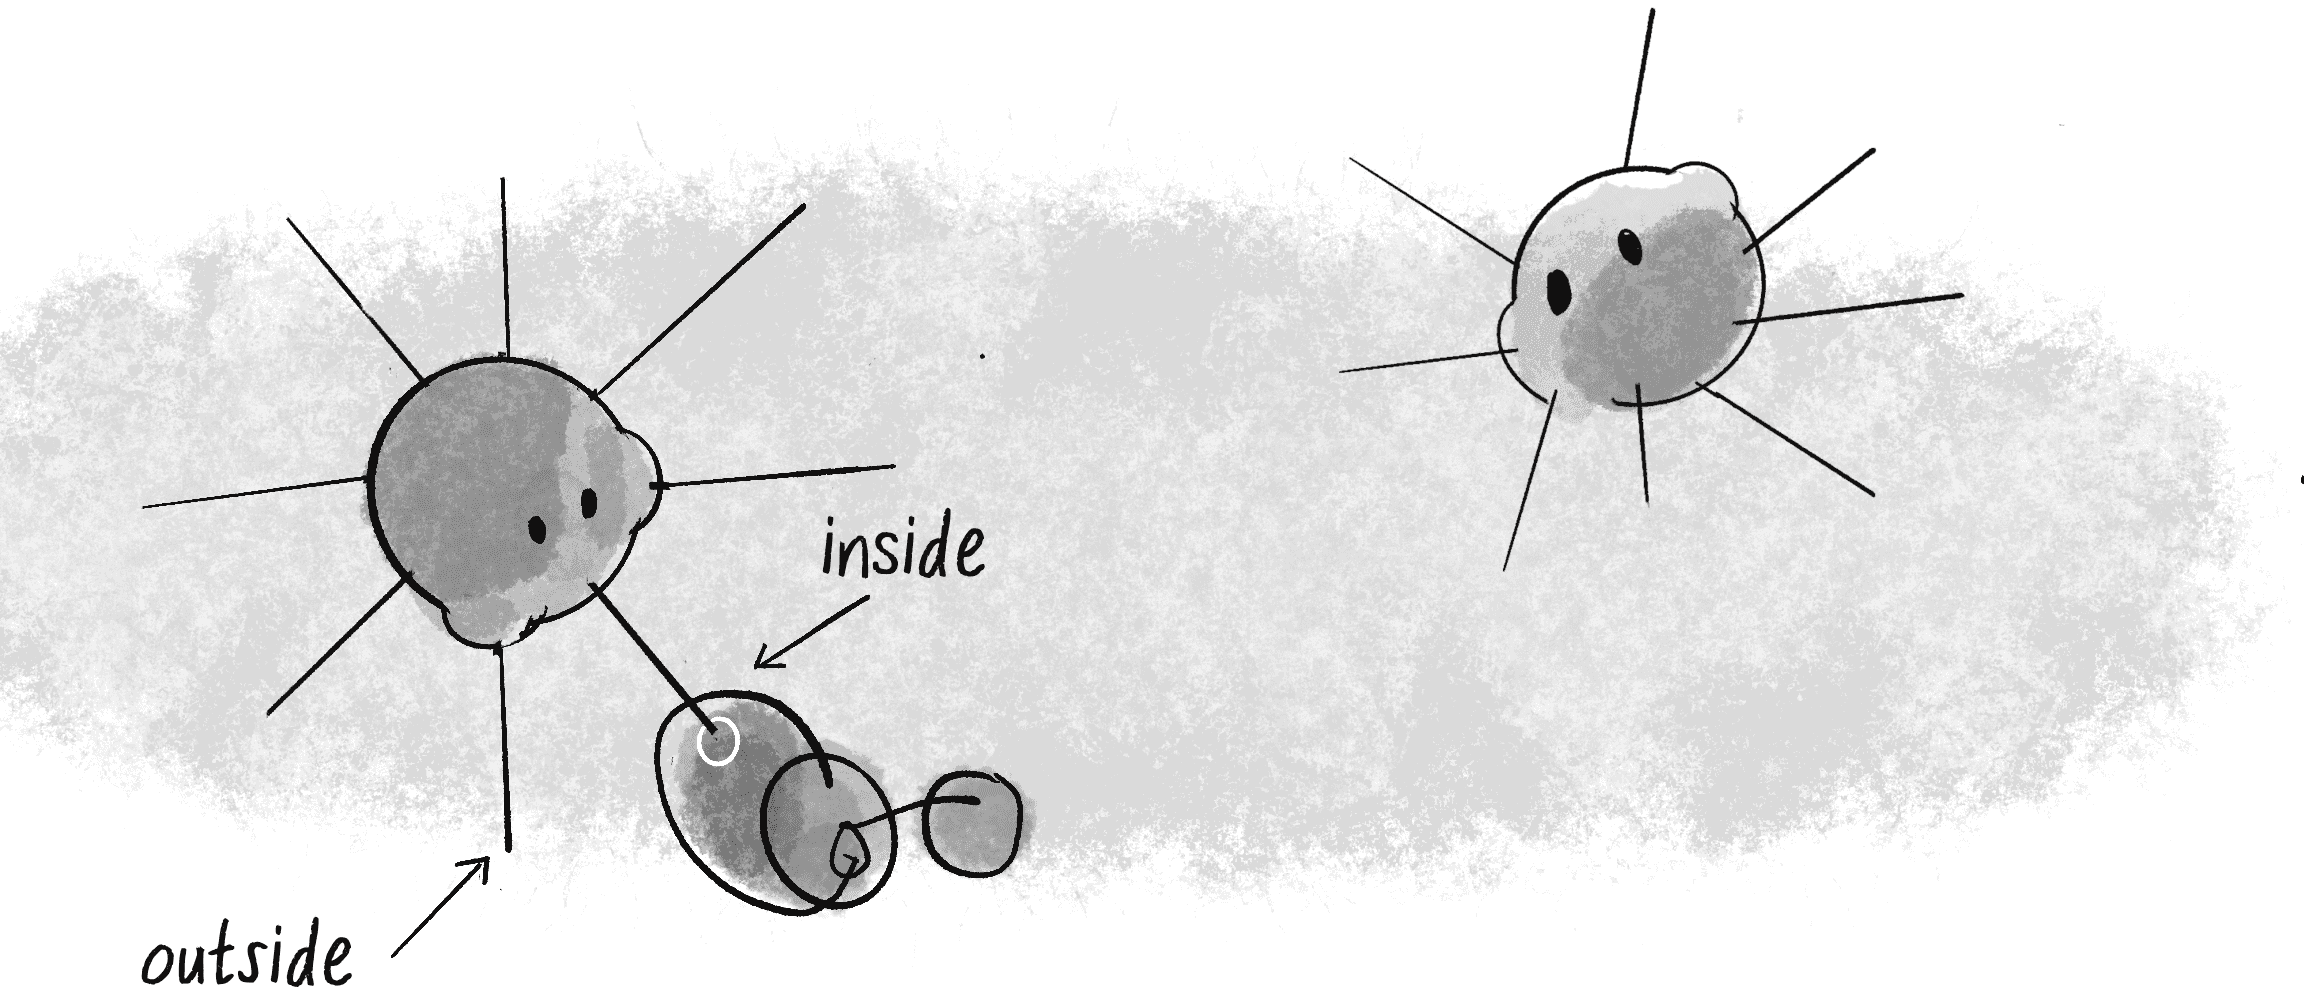 Figure 11.6: The endpoint of a sensor is inside or outside the food, based on its distance to the center of the food.